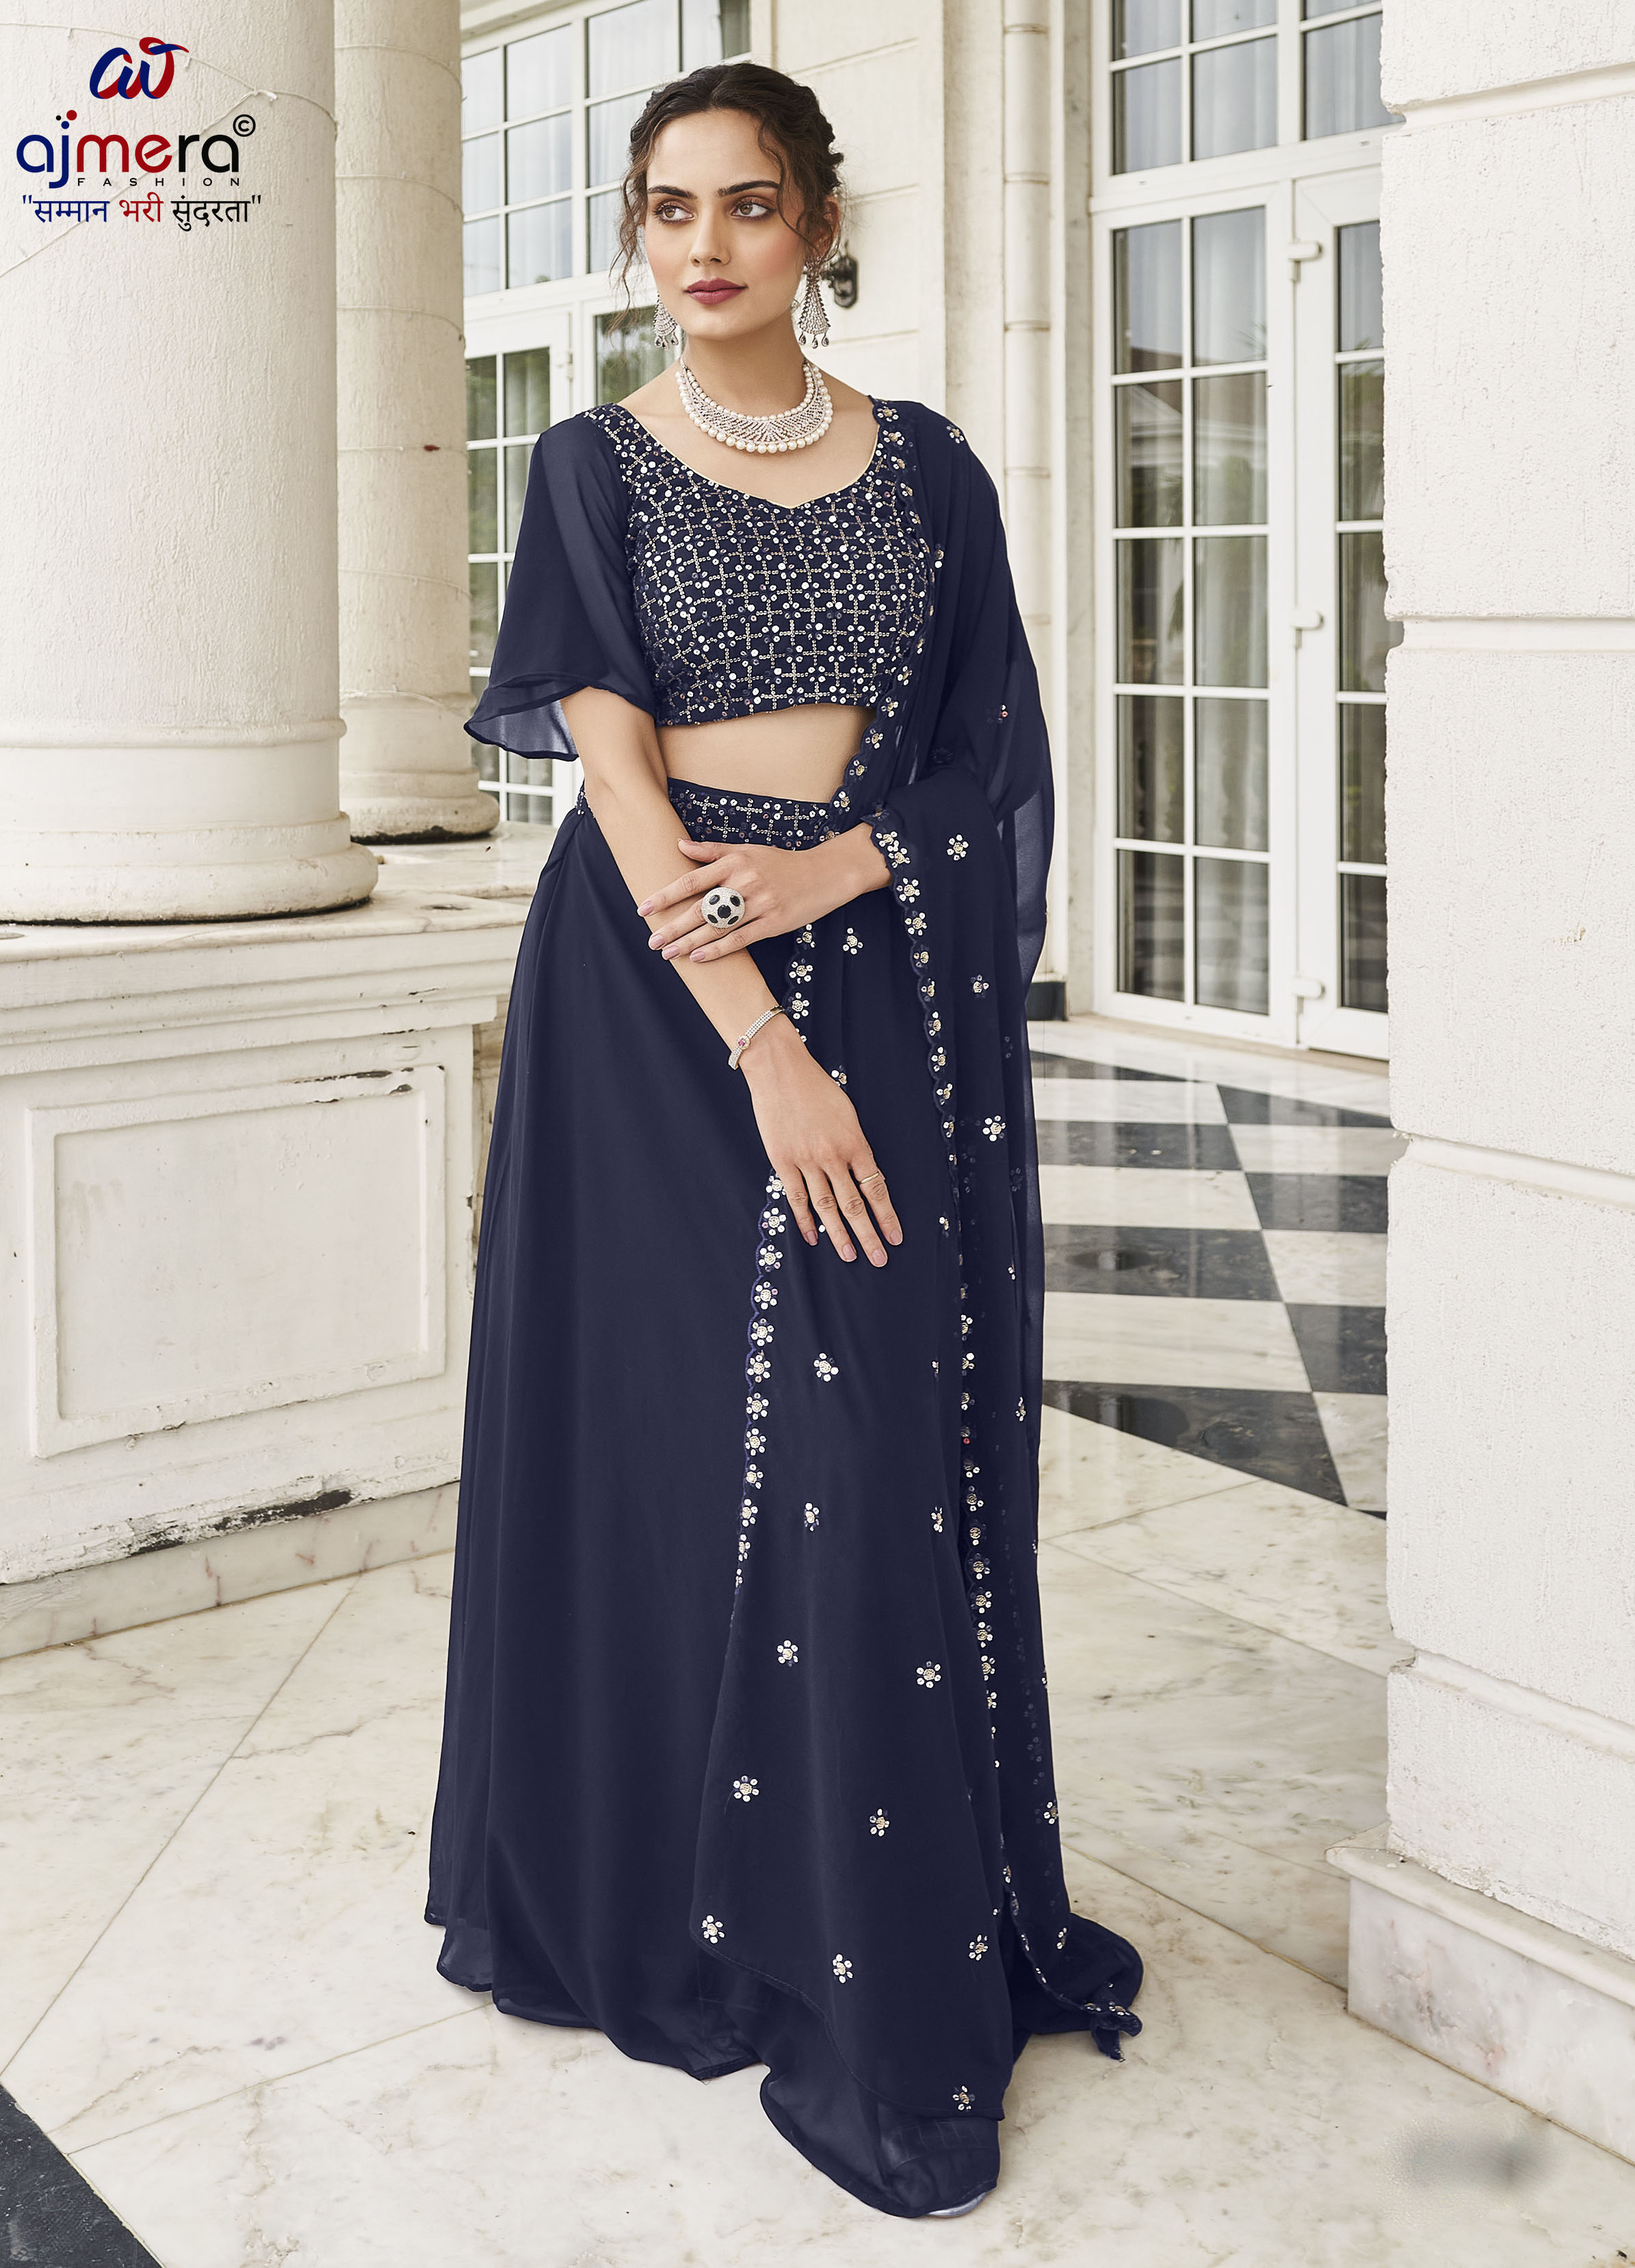 Partywear Lahenga Manufacturers, Suppliers in Hyderabad